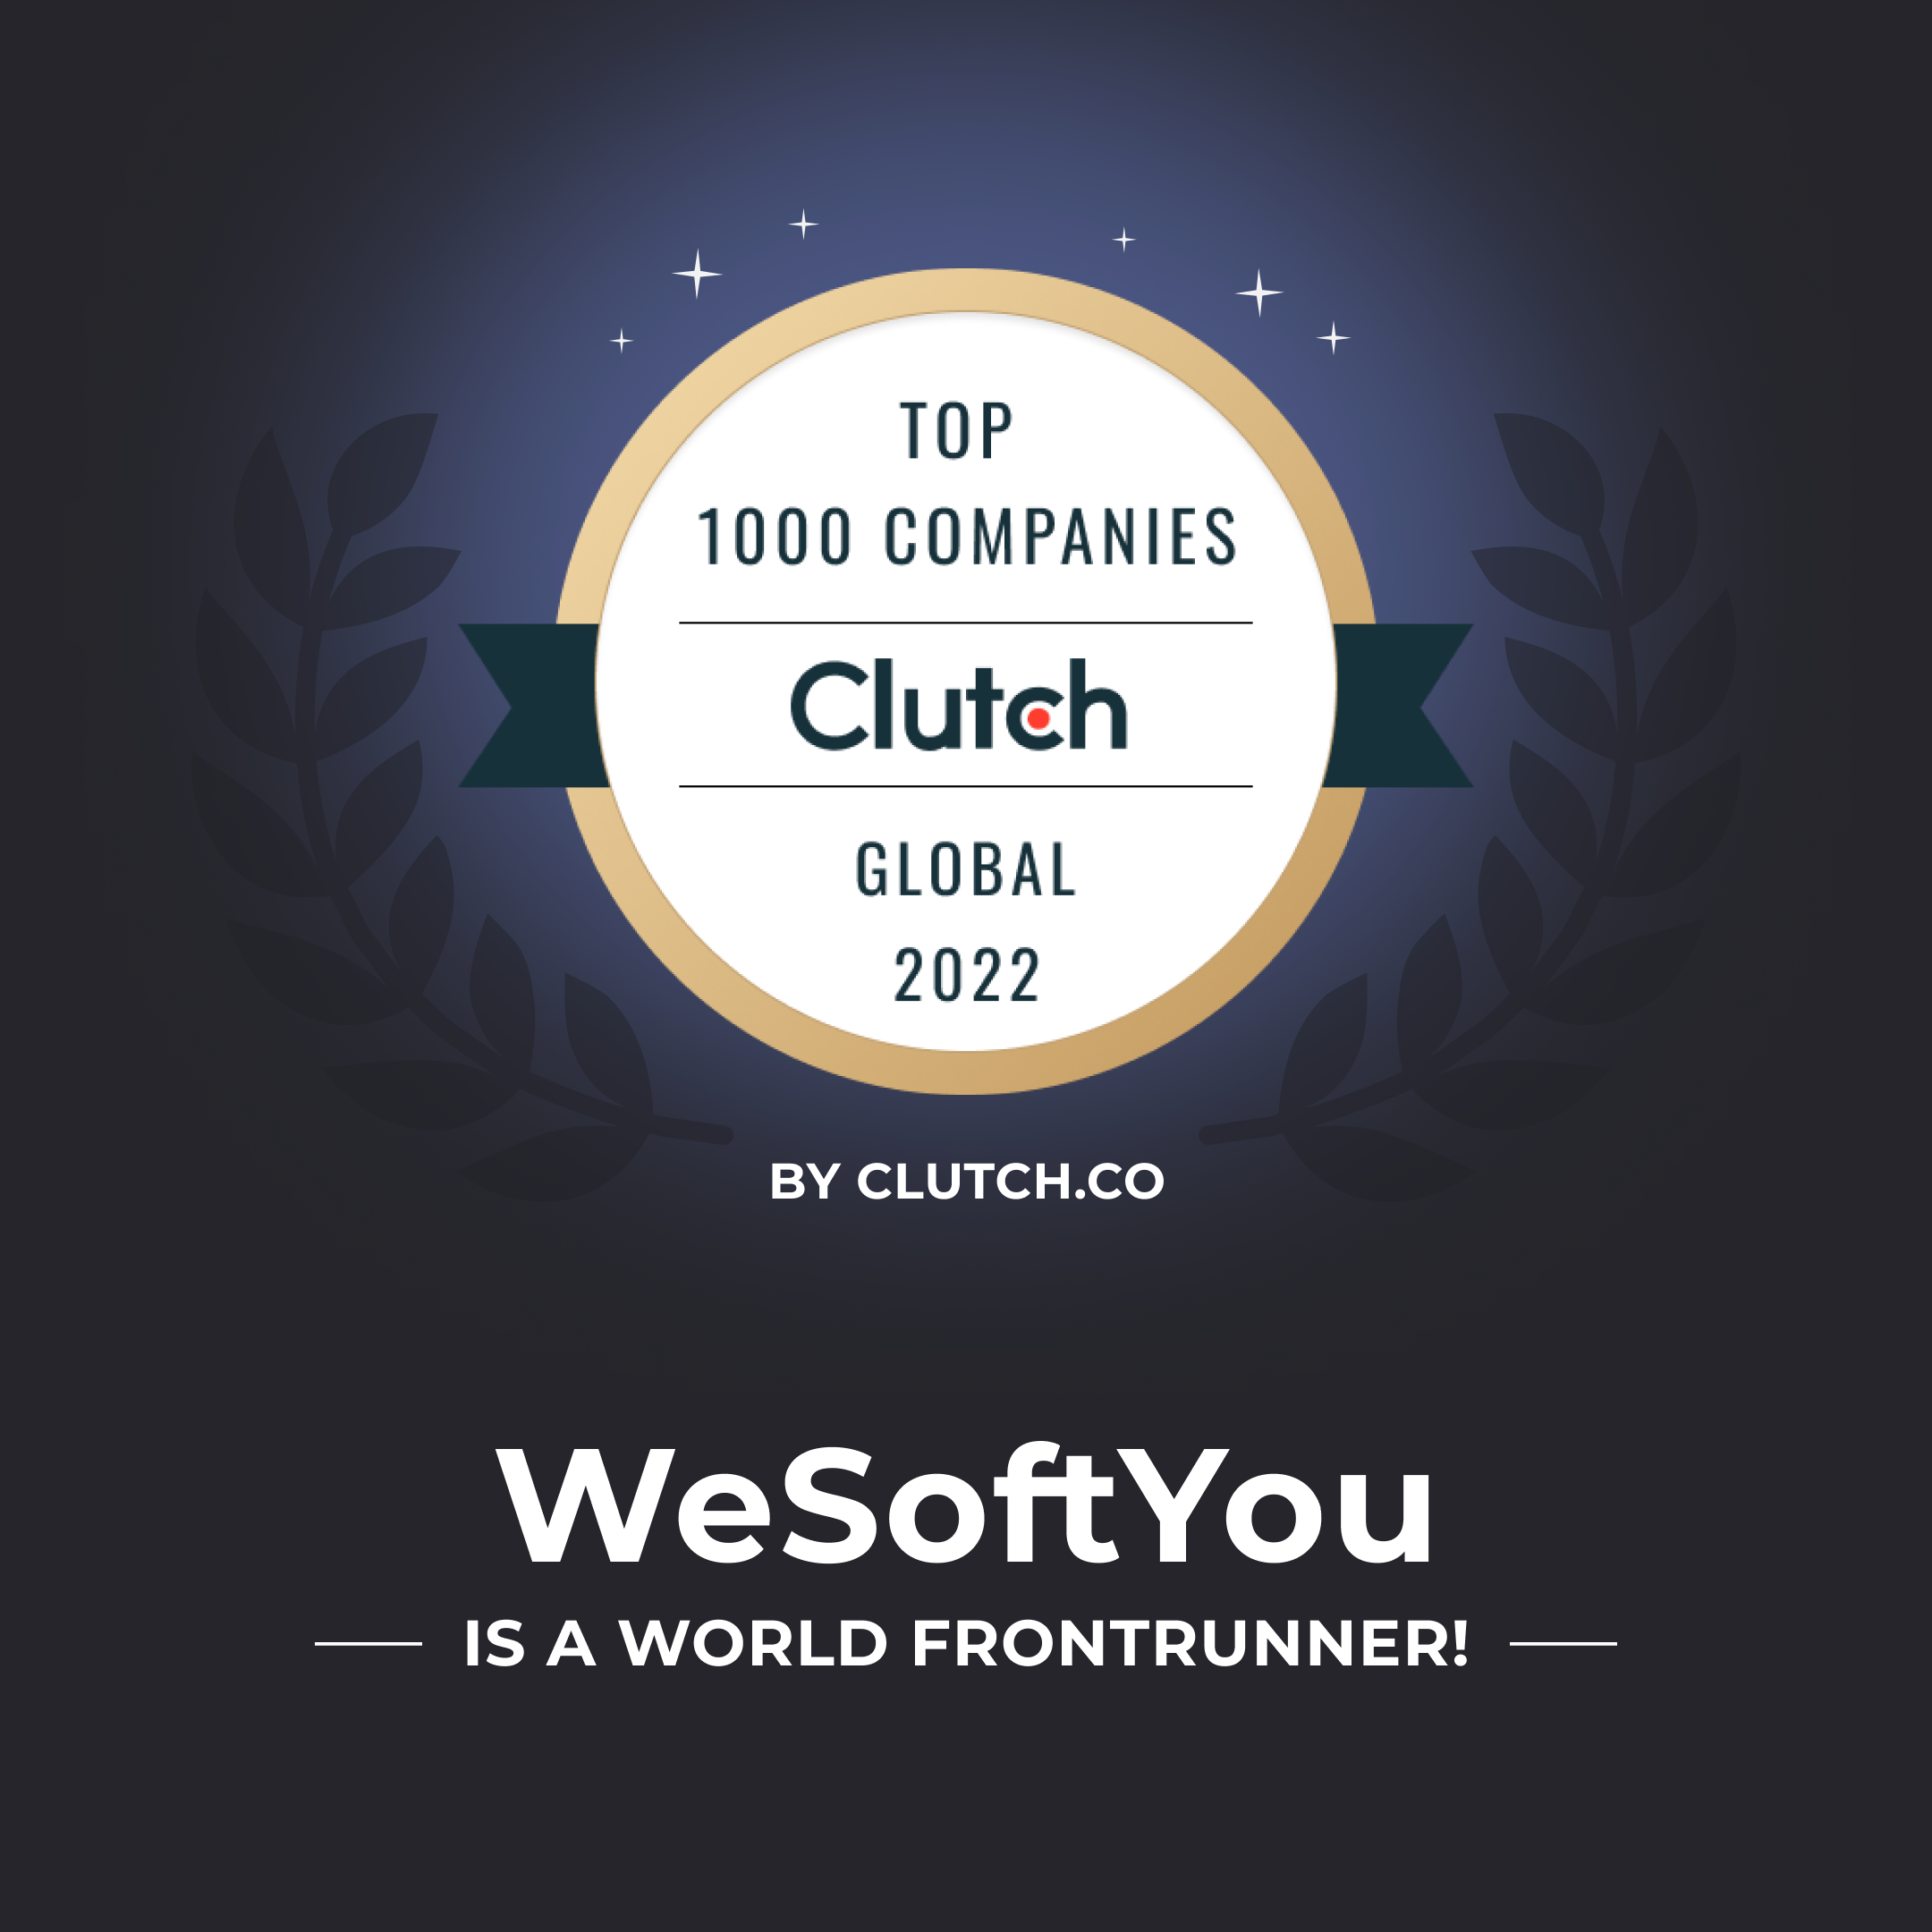 WSU is a world Frontrunner – Top 1% in the world by Clutch, image #10